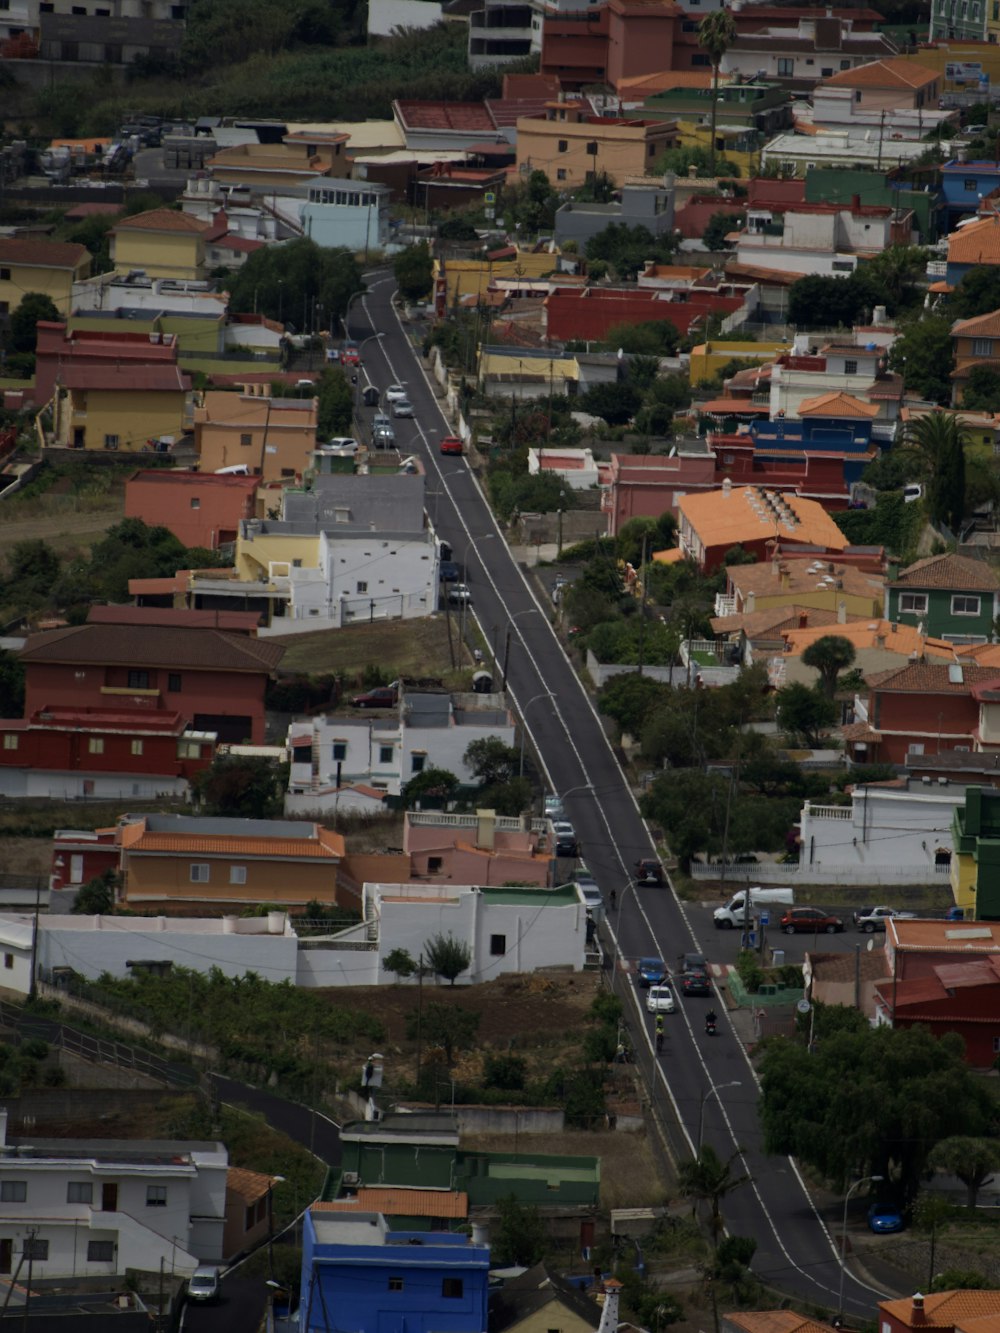 an aerial view of a street in a small town